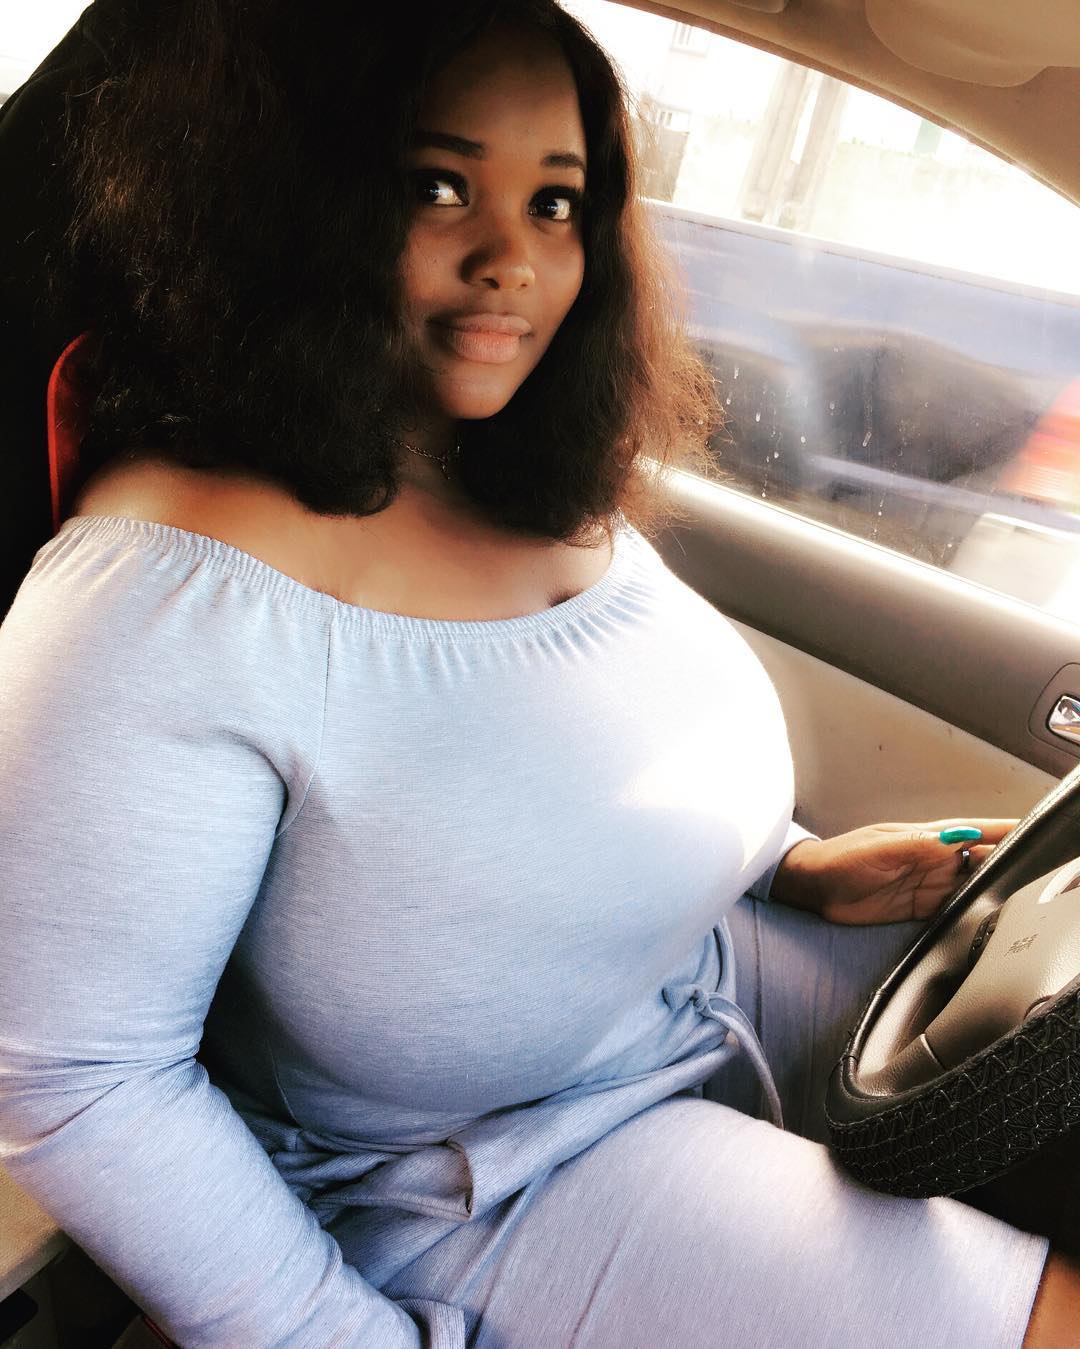 Busty Nigerian women have an ally in these Nigerian brands